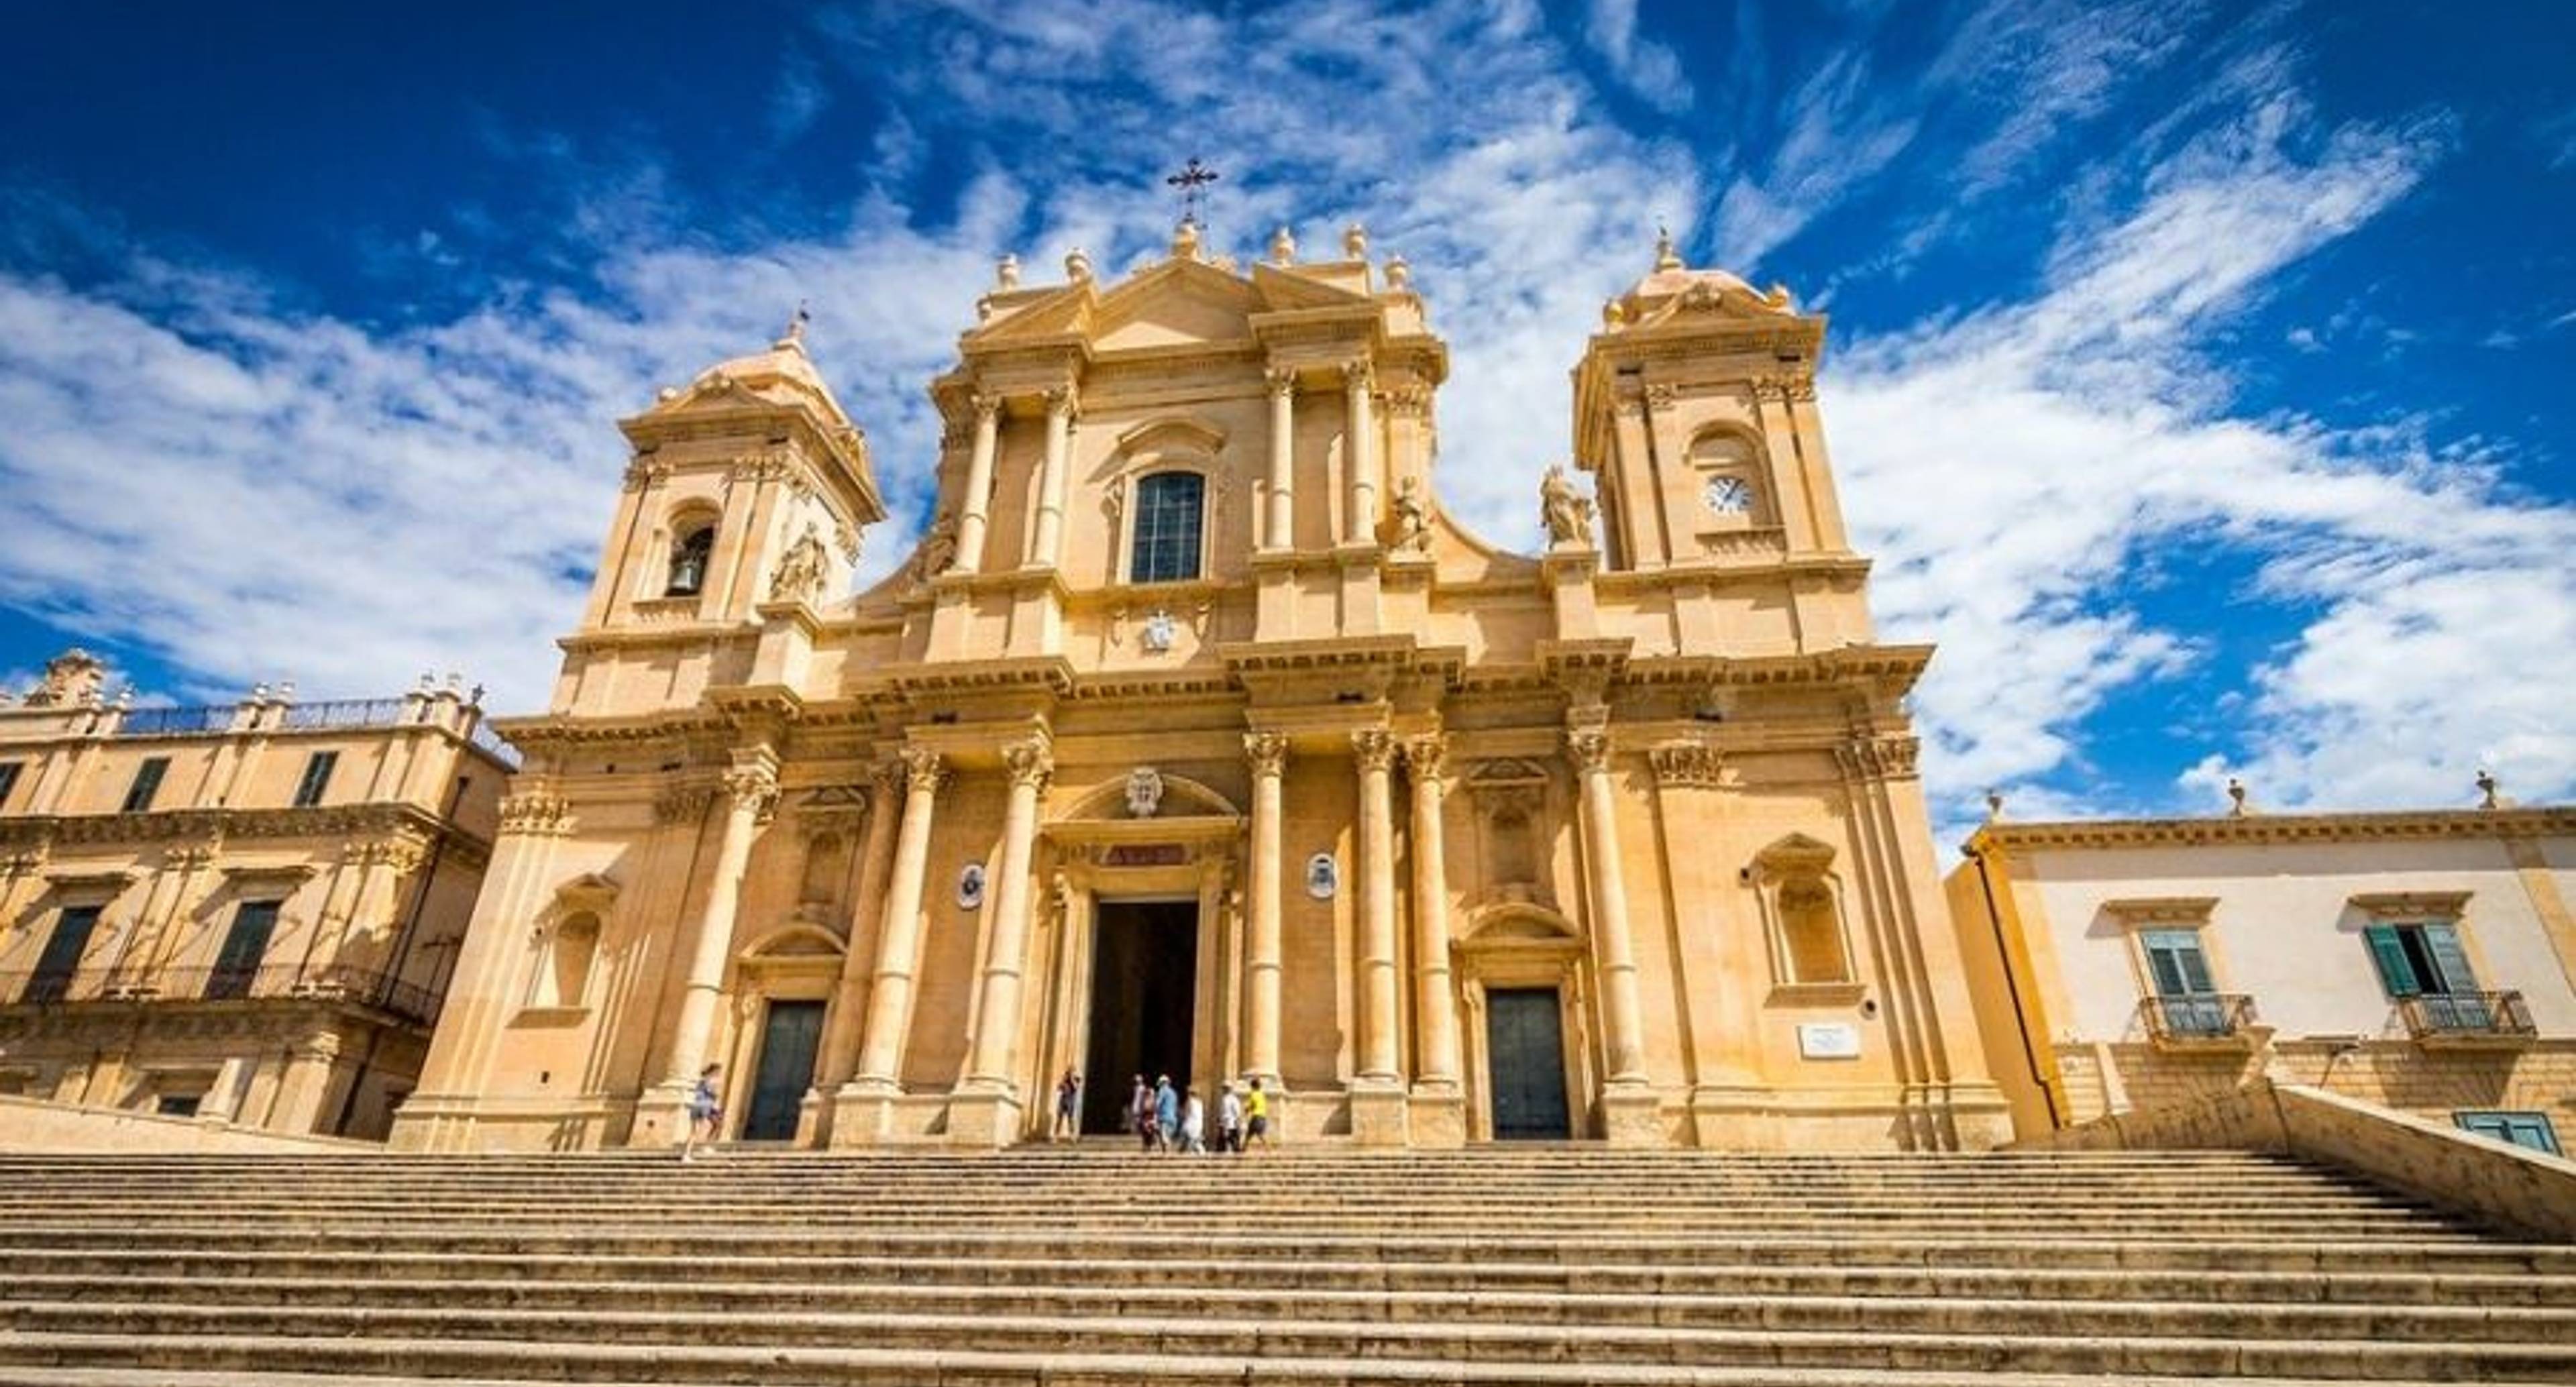 Welcome to the European capital of the Baroque: Noto!